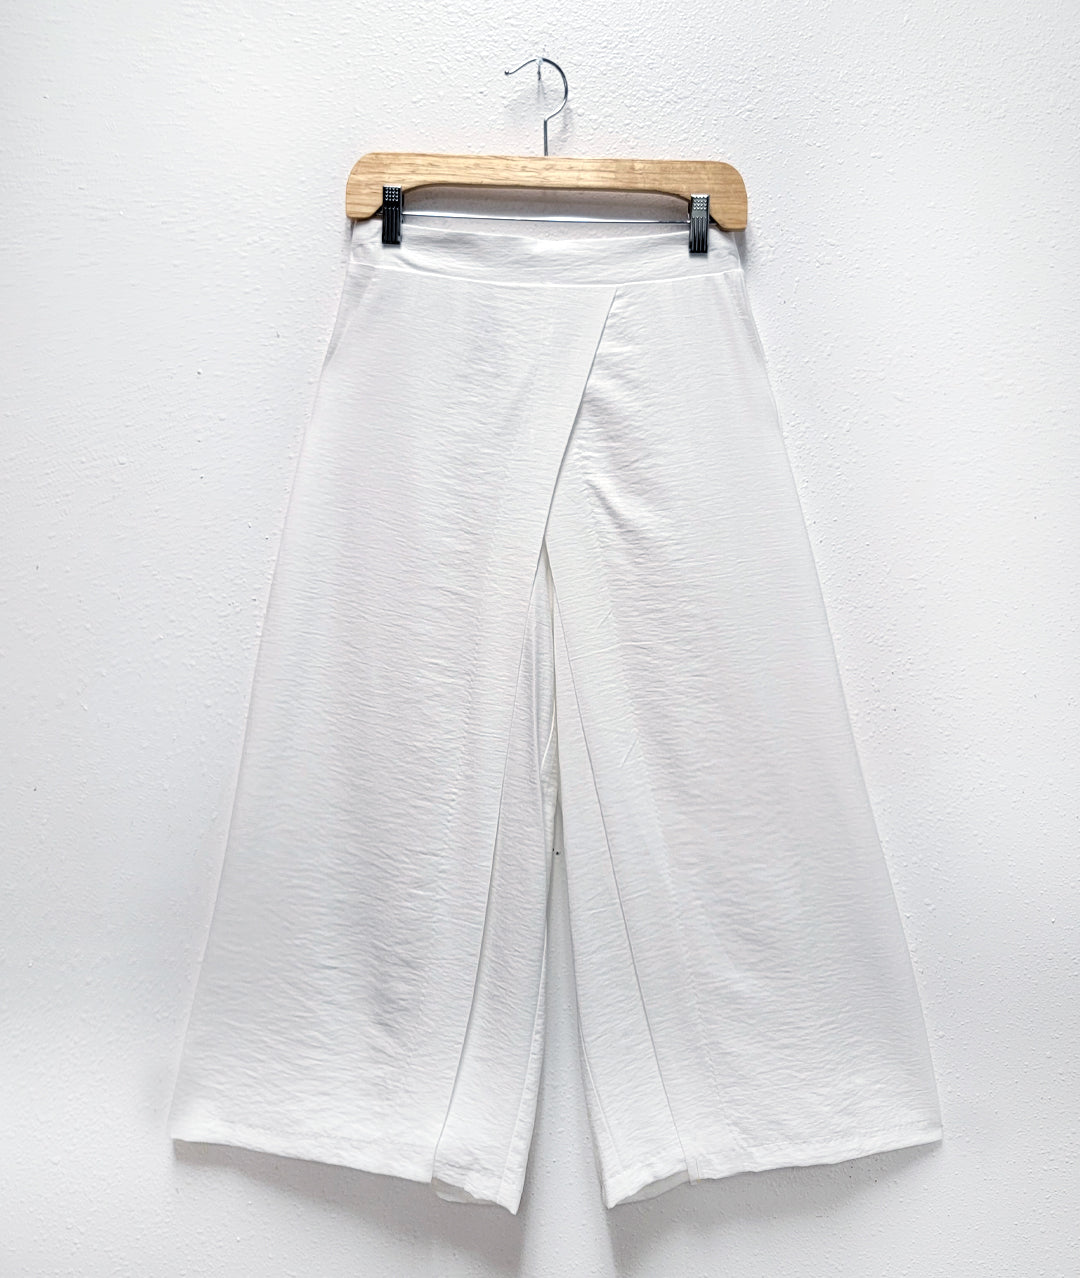 wide leg white pant with an overlapping panel on both legs, crossing in the front